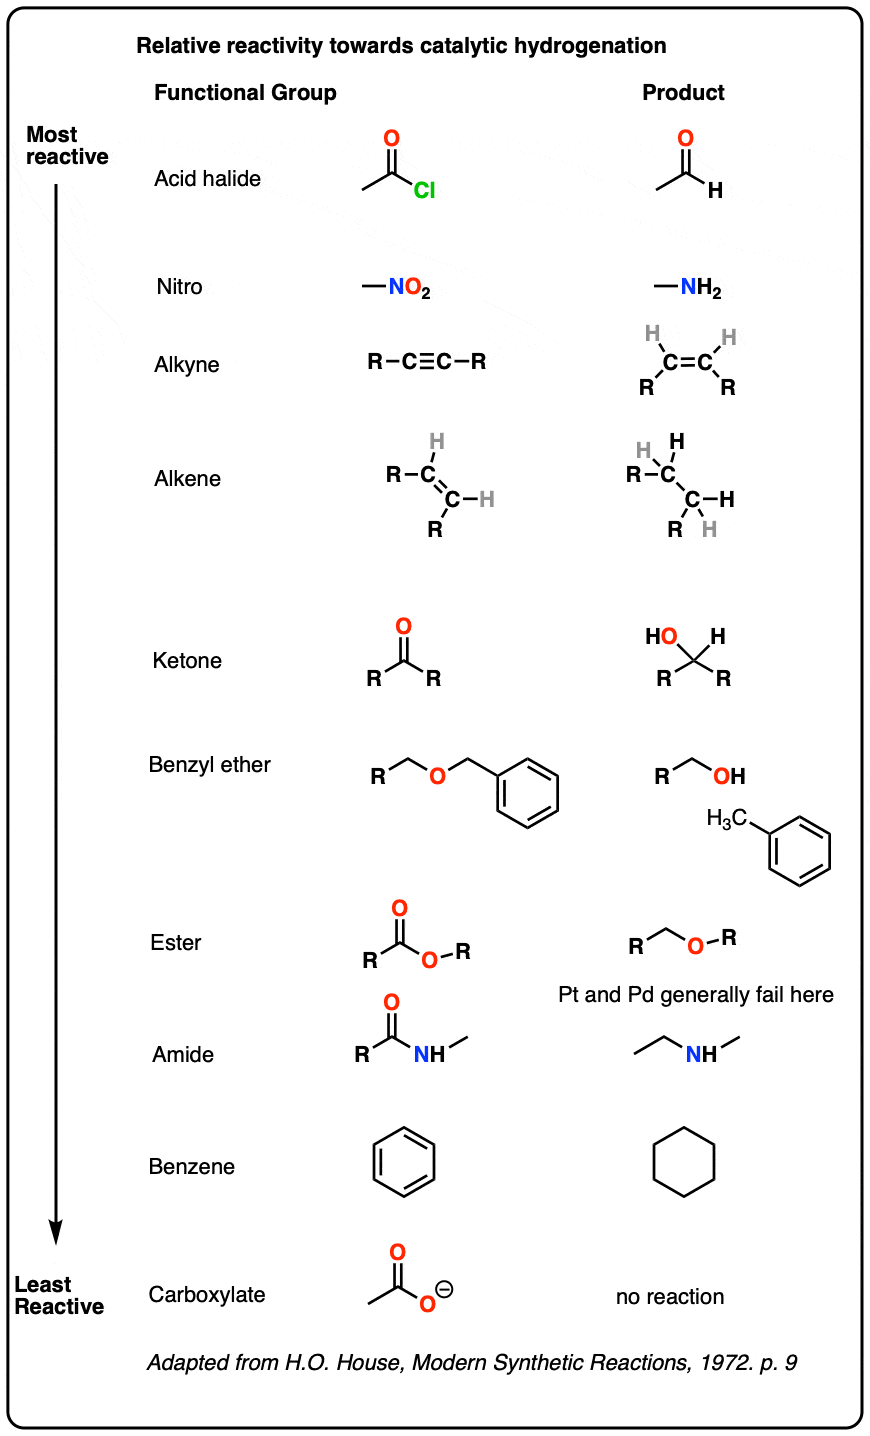 relative reactivity of various functional groups towards reduction with Pd and Pt with alkynes at top and benzene at bottom